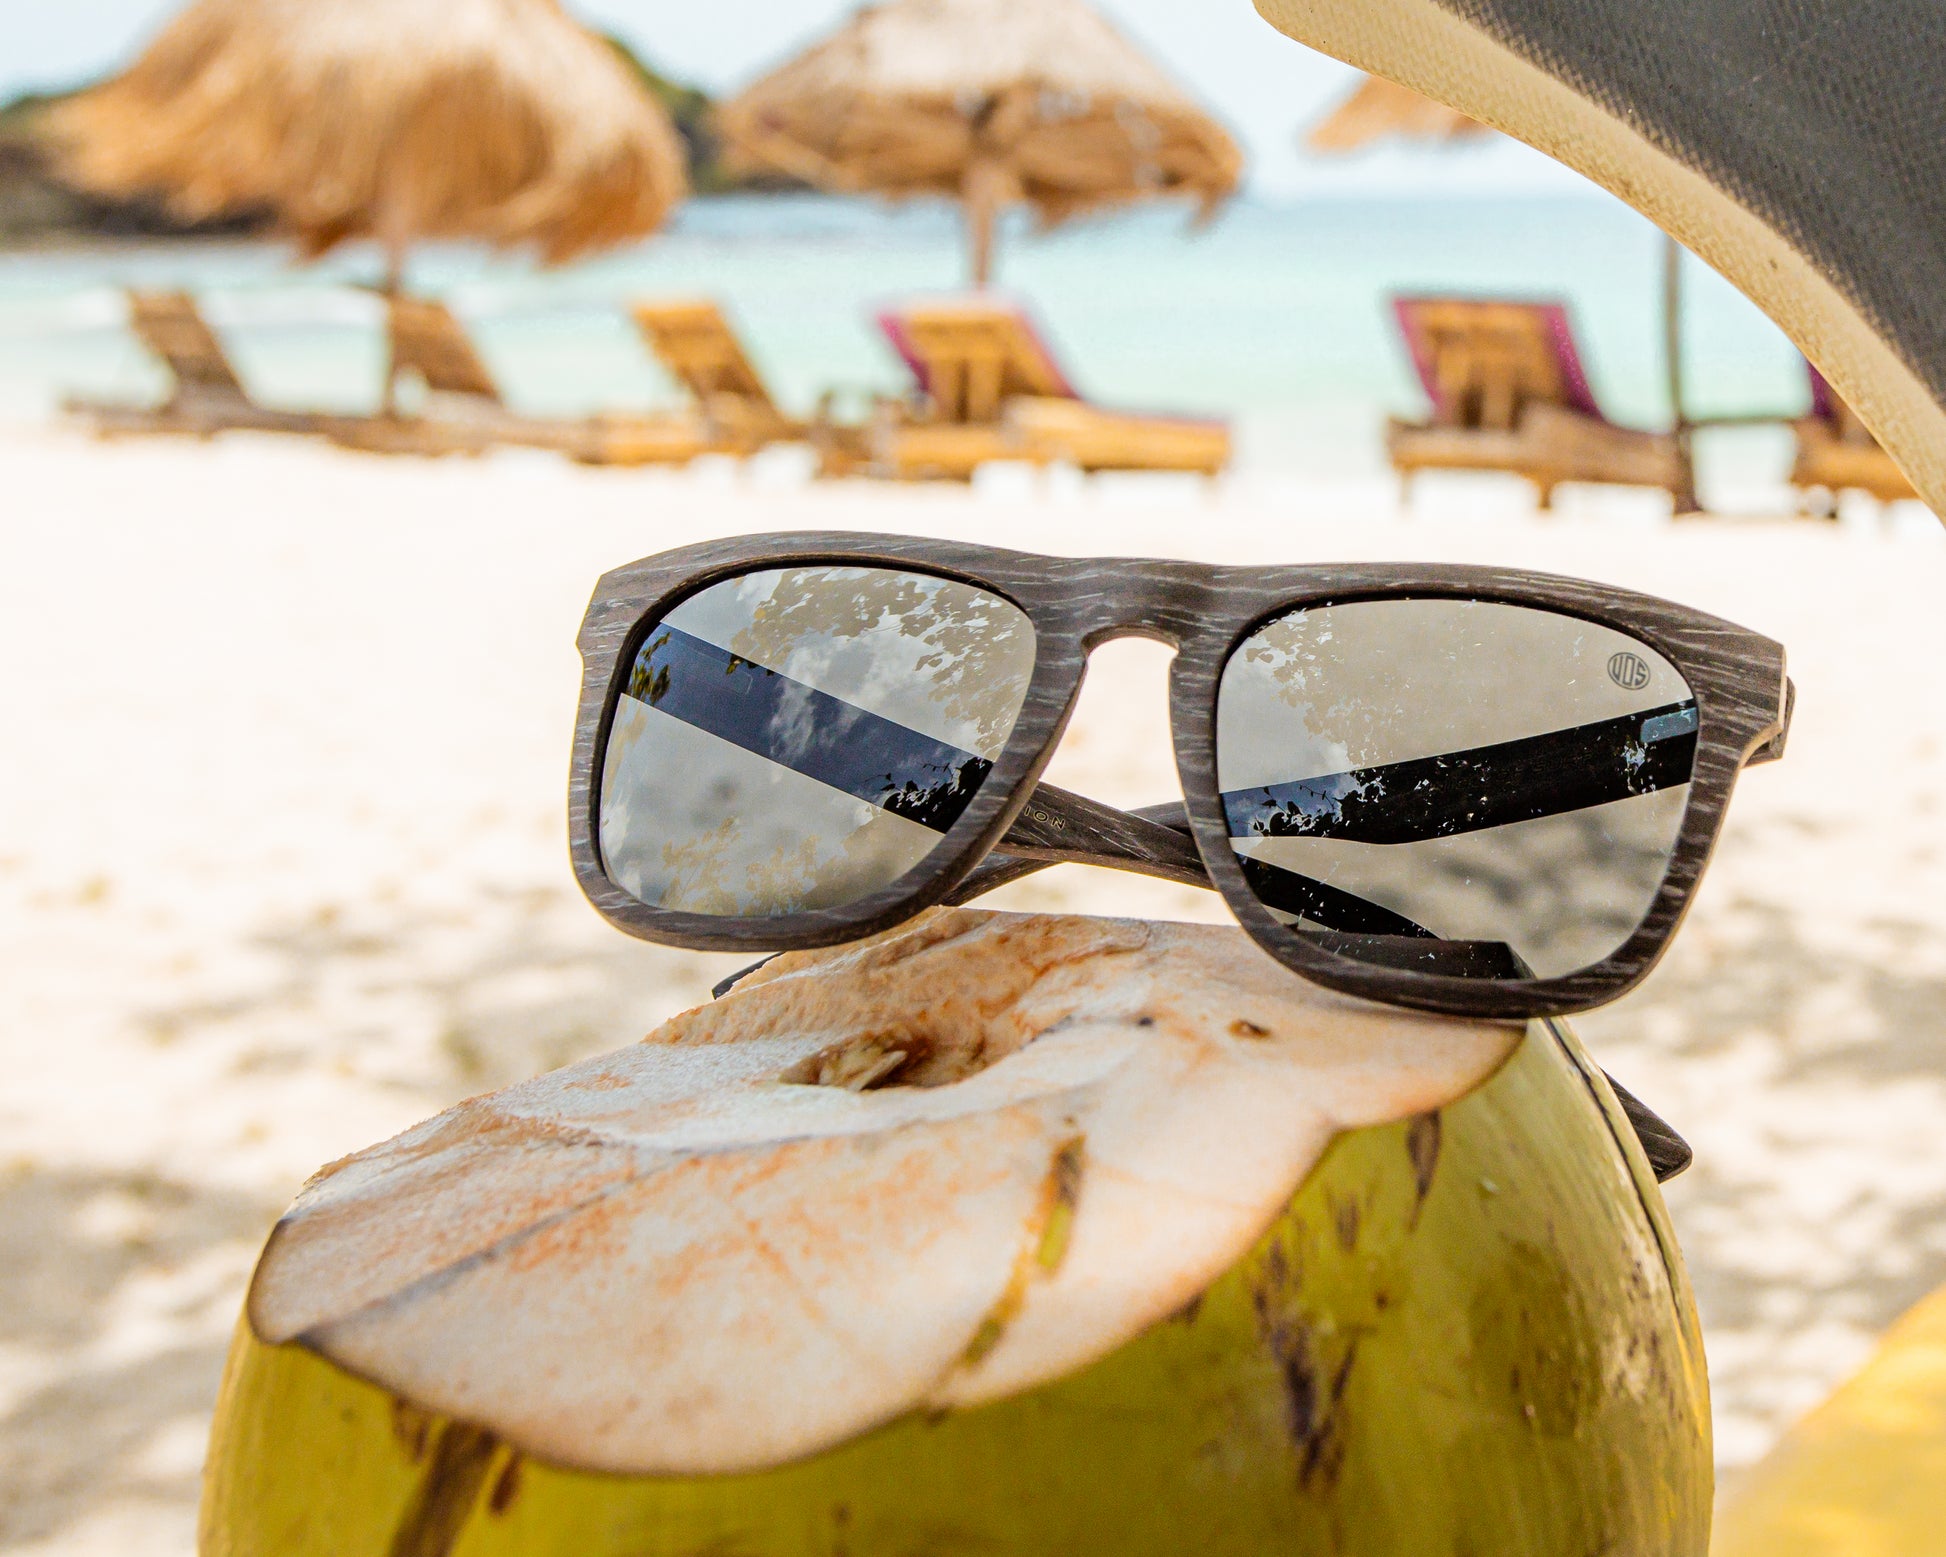 Unisex Sunglasses made from black wood, with polarised lenses. Photographed on a beach in Indonesia